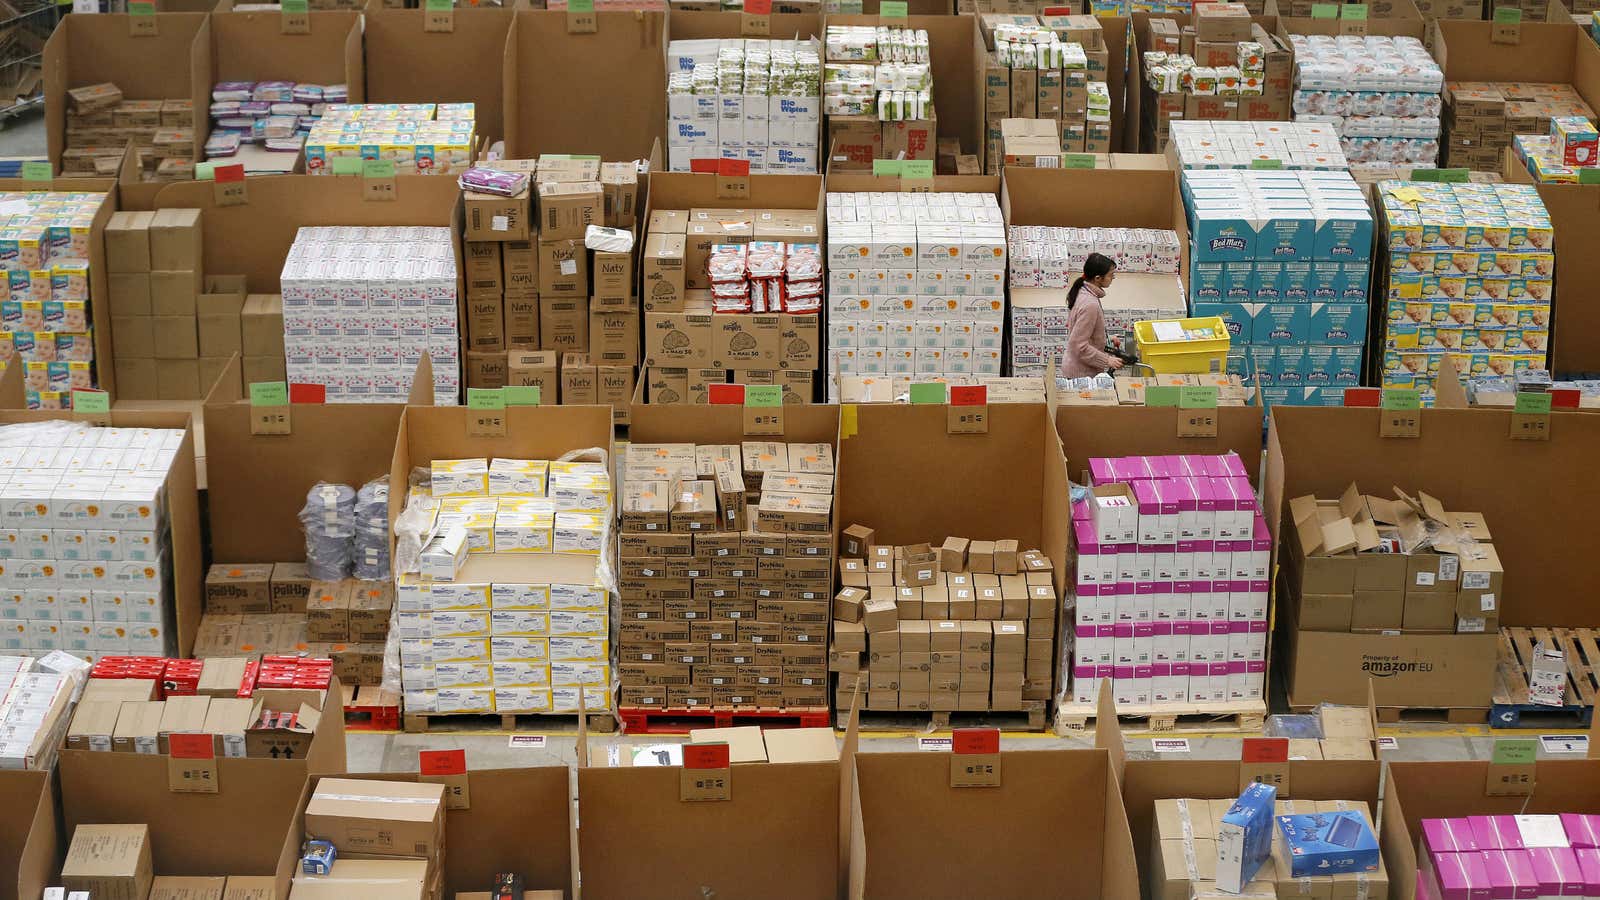 Amazon has nailed logistics and shipping—but that’s not the only way to win retail.